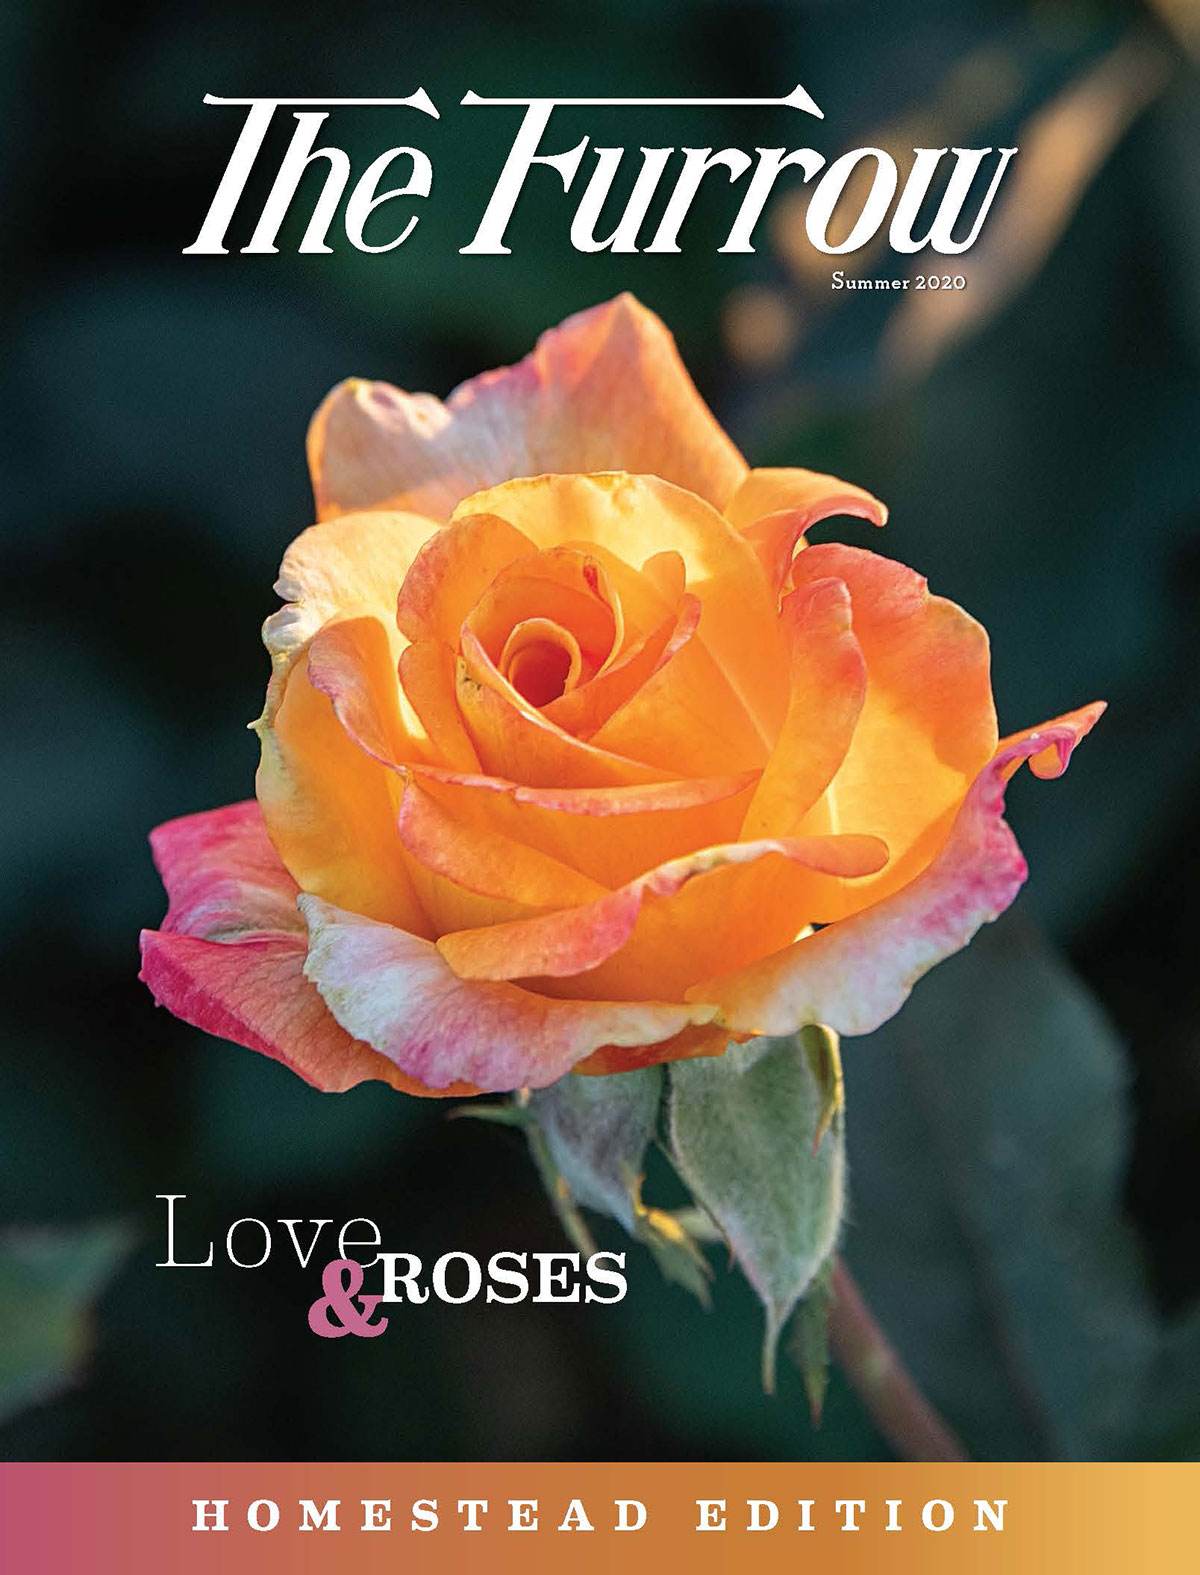 The Furrow - Summer 2020 Issue